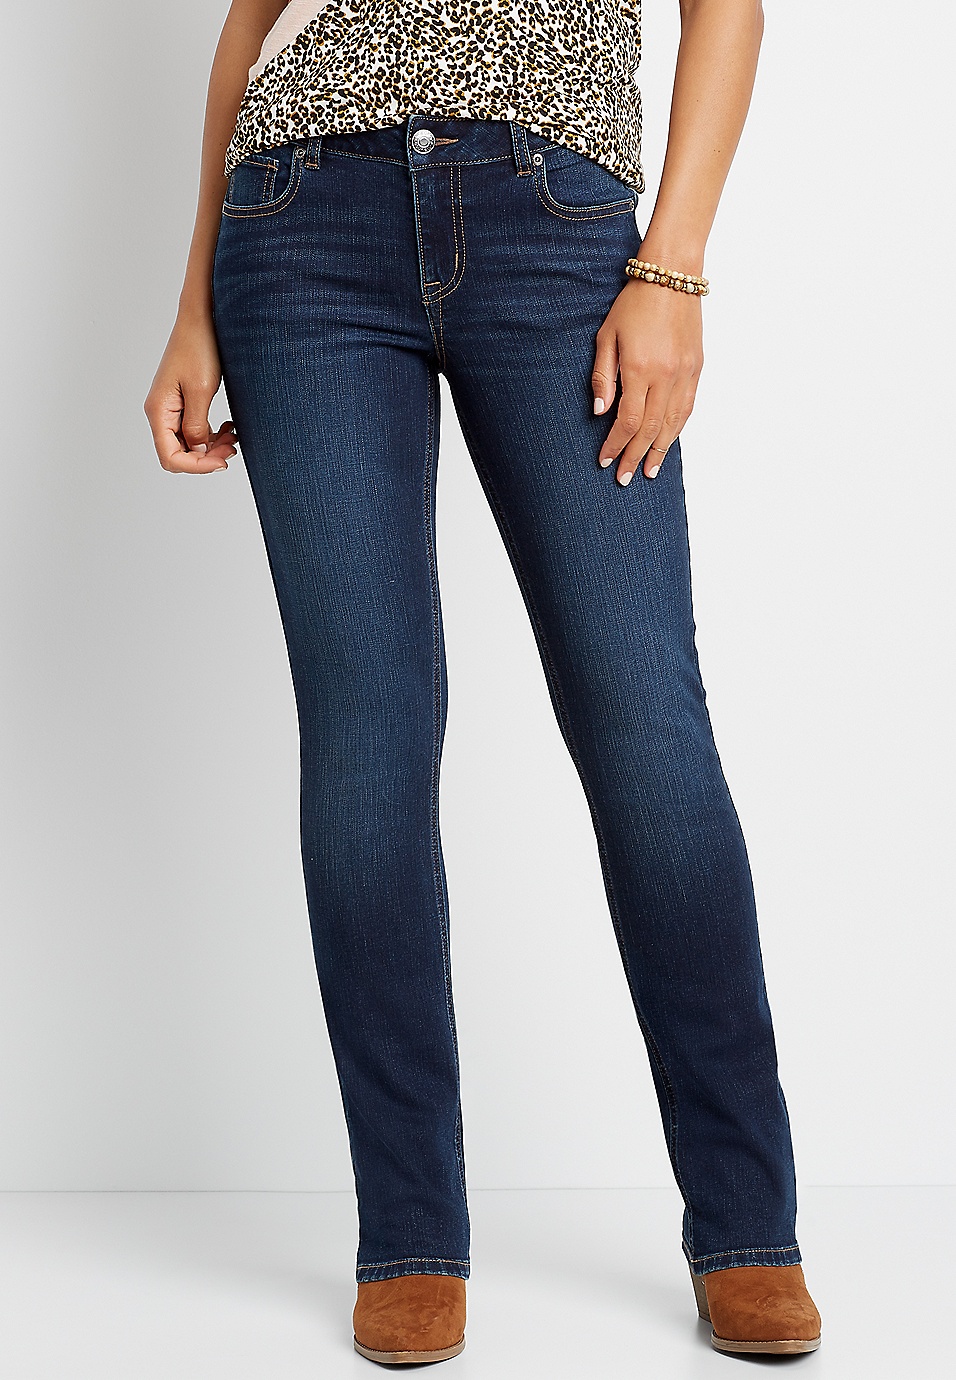 m jeans by maurices™ Classic Slim Boot Mid Rise Jean | maurices